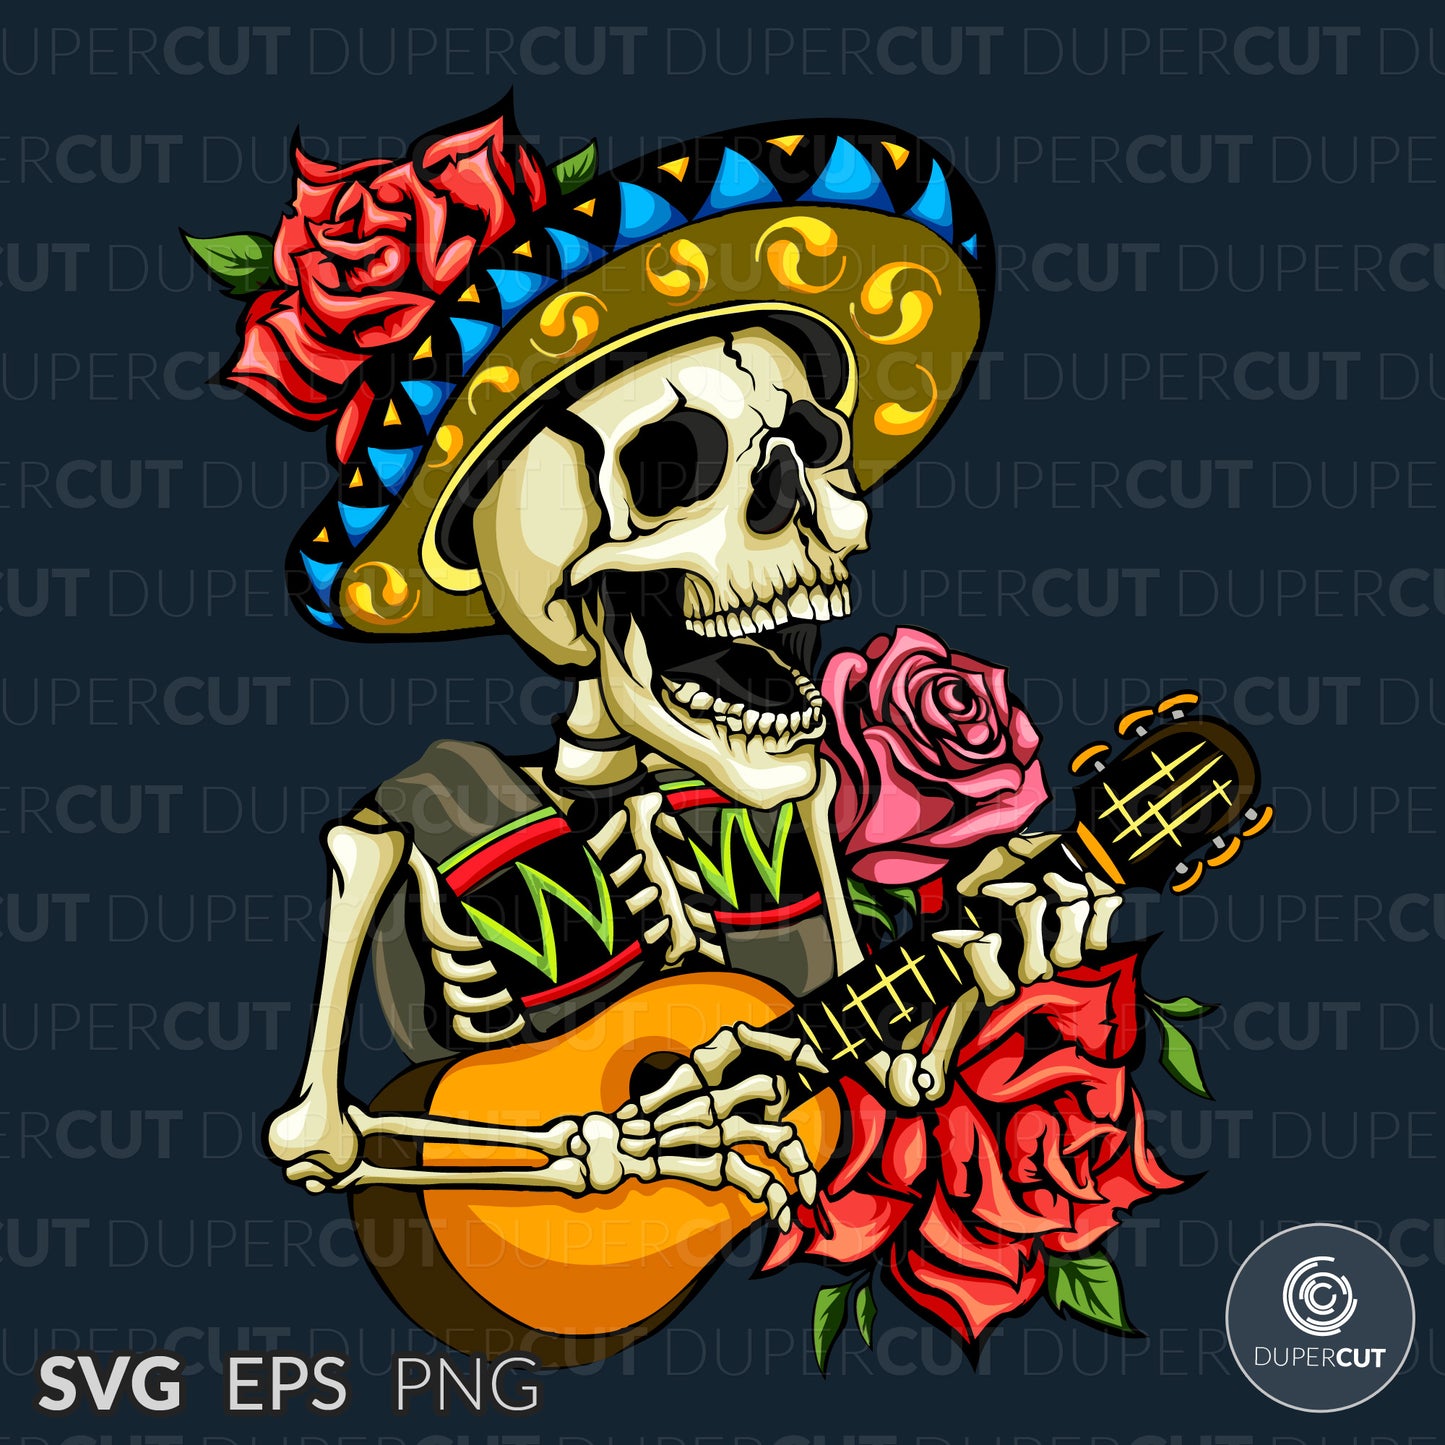 Mexican hat skeleton with guitar - Custom apparel design, Amazon merch template - EPS, SVG, PNG files. Vector Colour illustration for print on demand, sublimation, custom t-shirts, hoodies, tumblers.